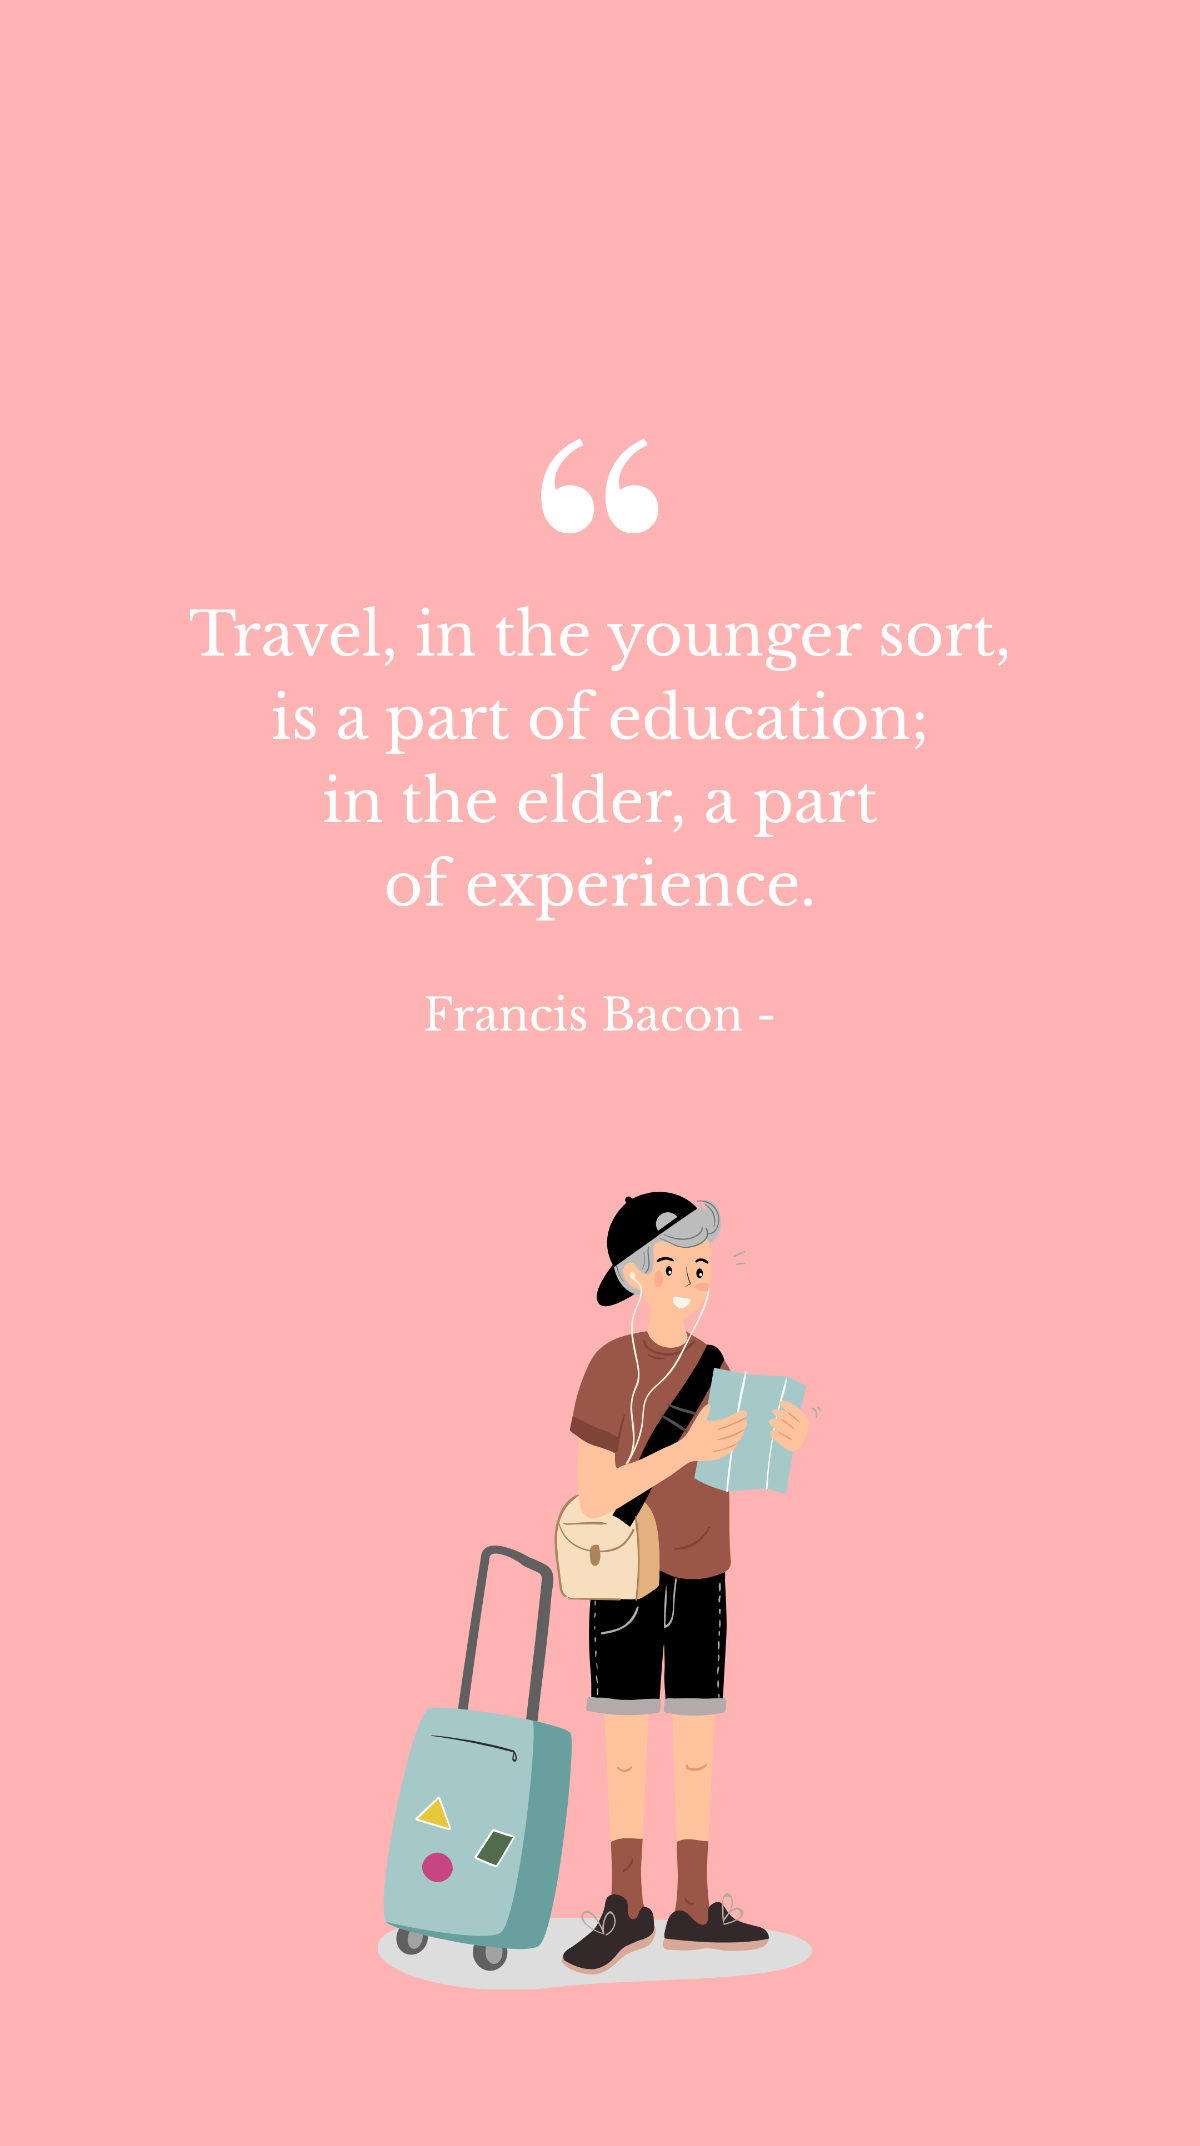 Francis Bacon - Travel, in the younger sort, is a part of education; in the elder, a part of experience. Template